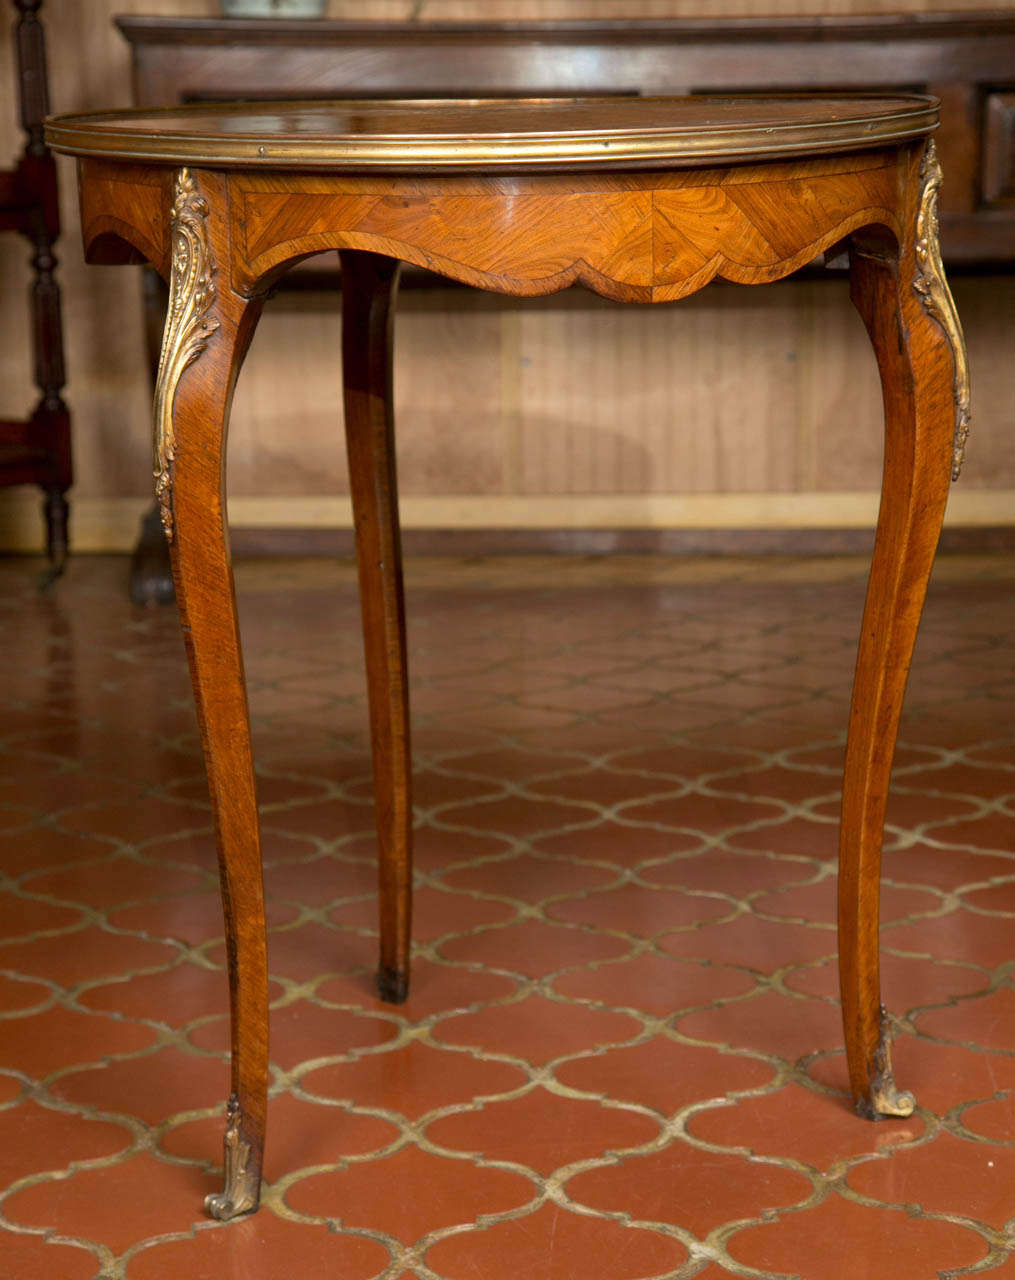 This dynamic little table in kingwood features a parquetry top, brass ring surround and ormolu knee mounts on the three cabriole legs. The shaped apron is cross banded in kingwood as well and it offers a bit of depth to the top that gives it just